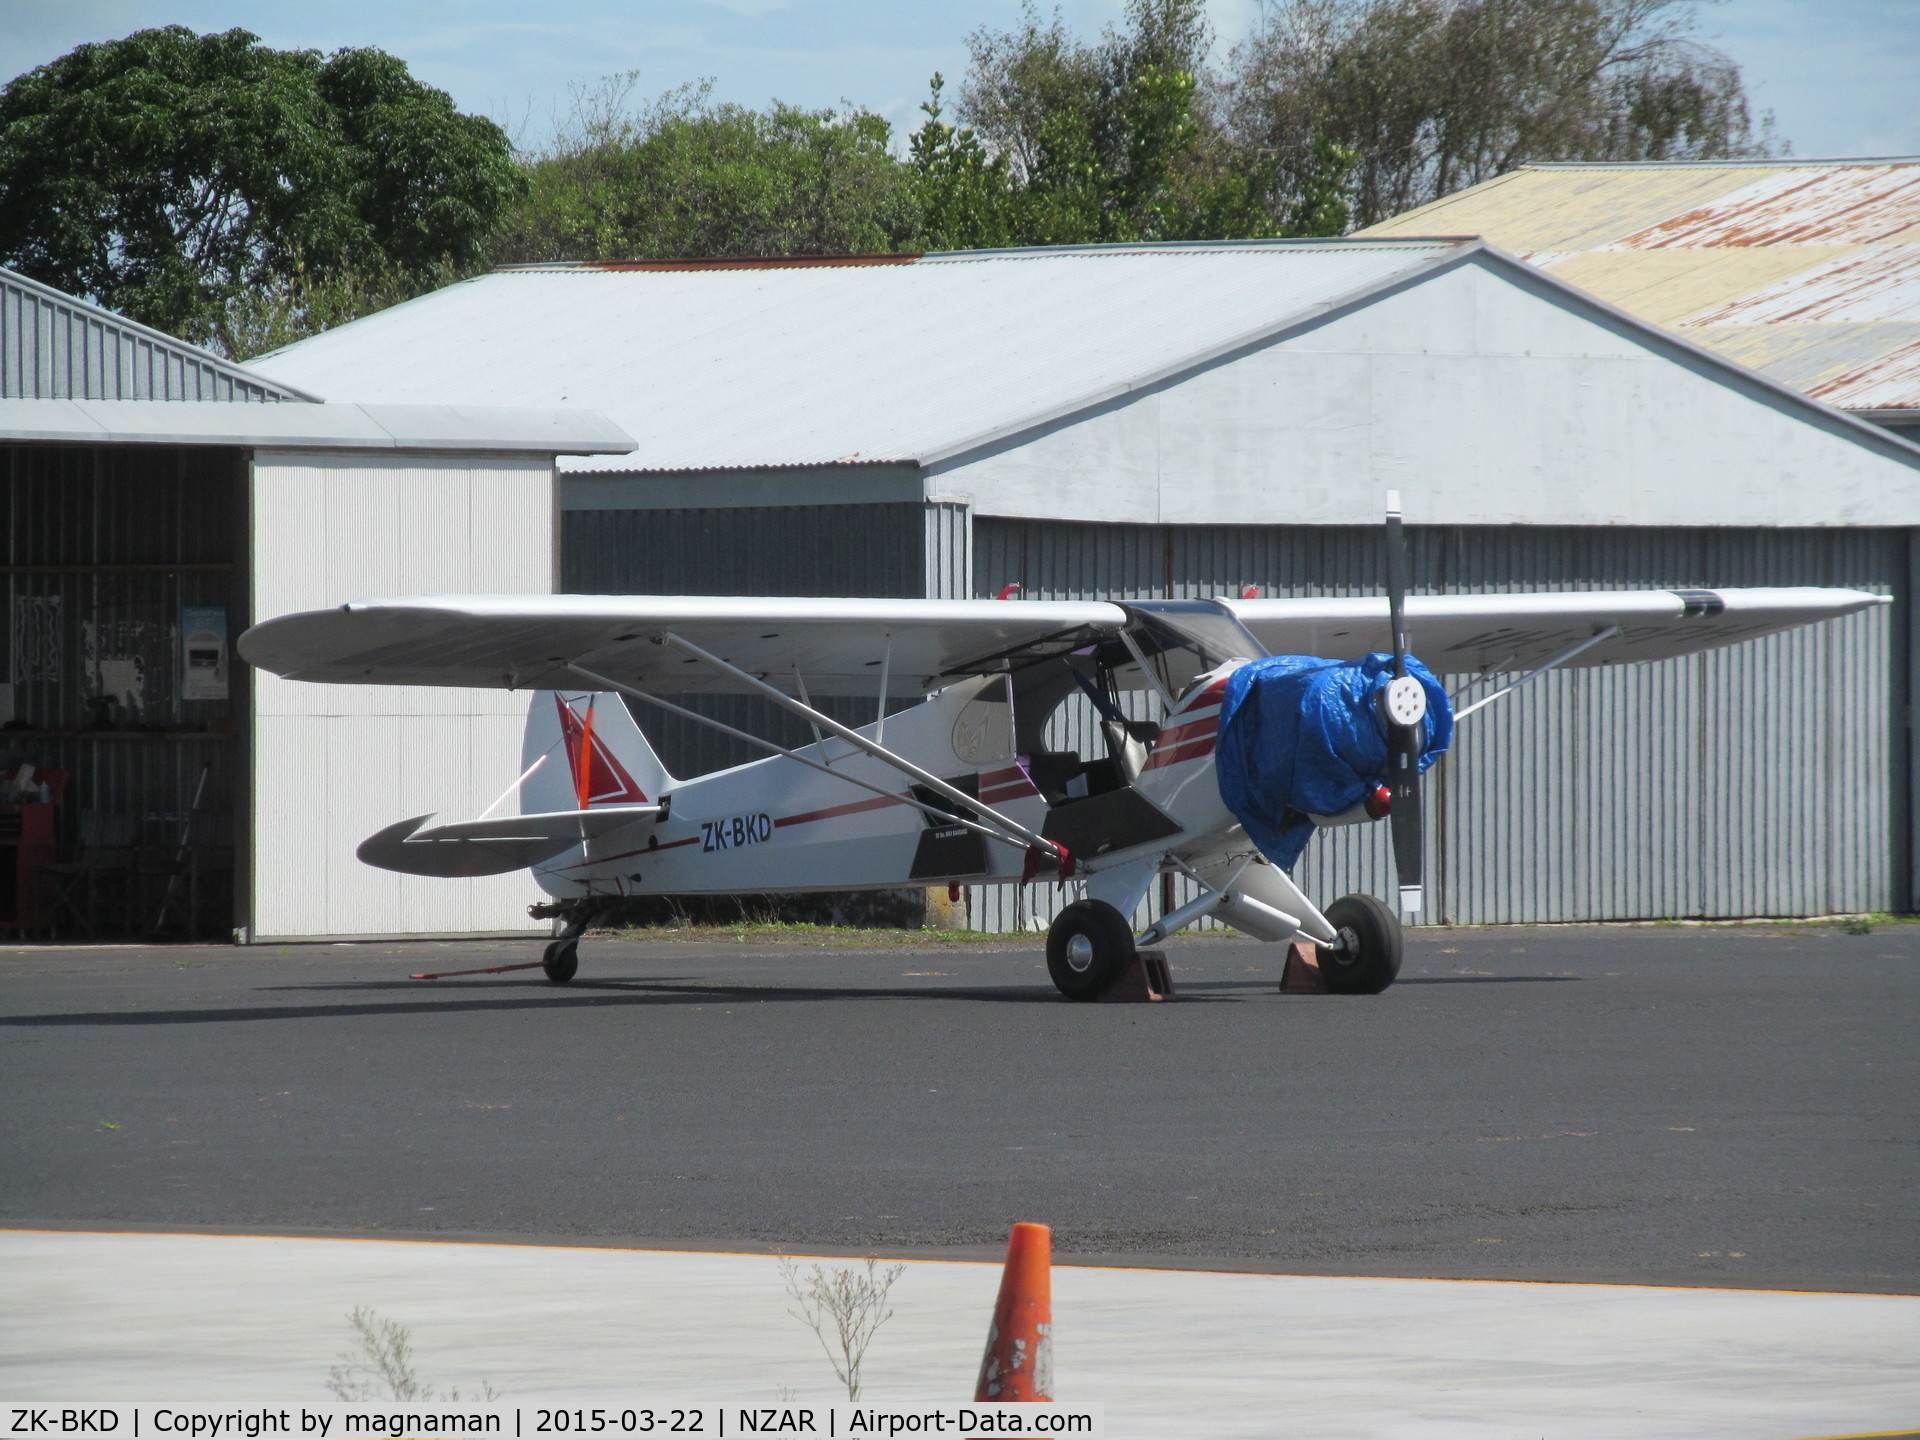 ZK-BKD, 1966 Piper PA-18-150 Super Cub C/N 18-8470, new ex VH-PPH (still wearing under wing)  cub to NZ register at Ardmore base c/n 18-8470